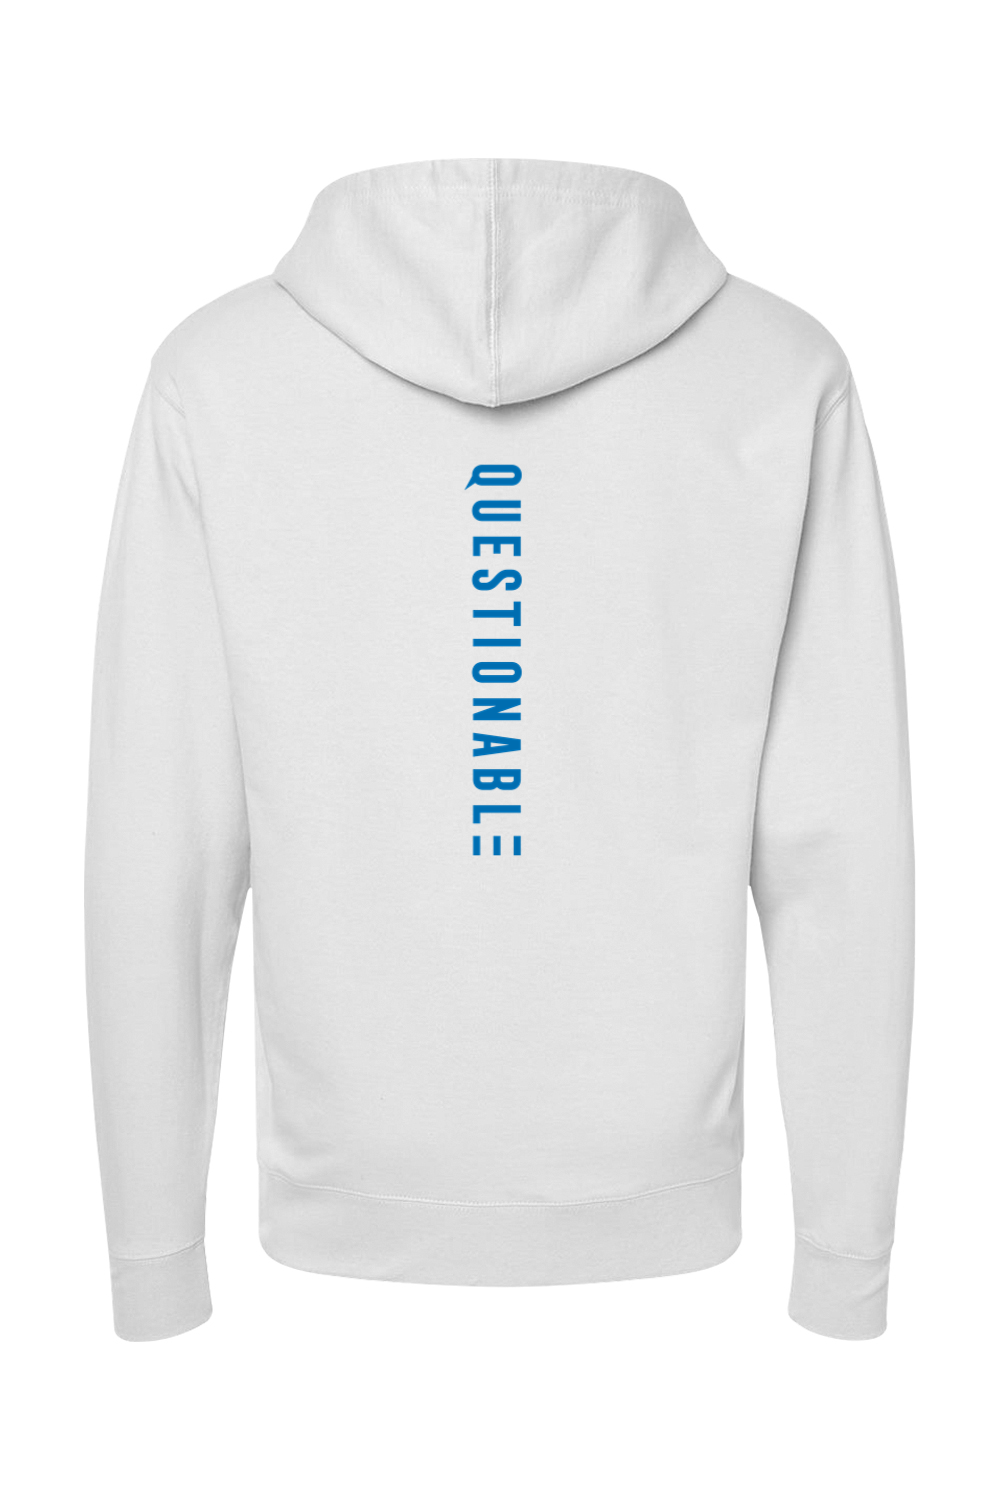 D-Mon 2023 - Lions Midweight Hoodie